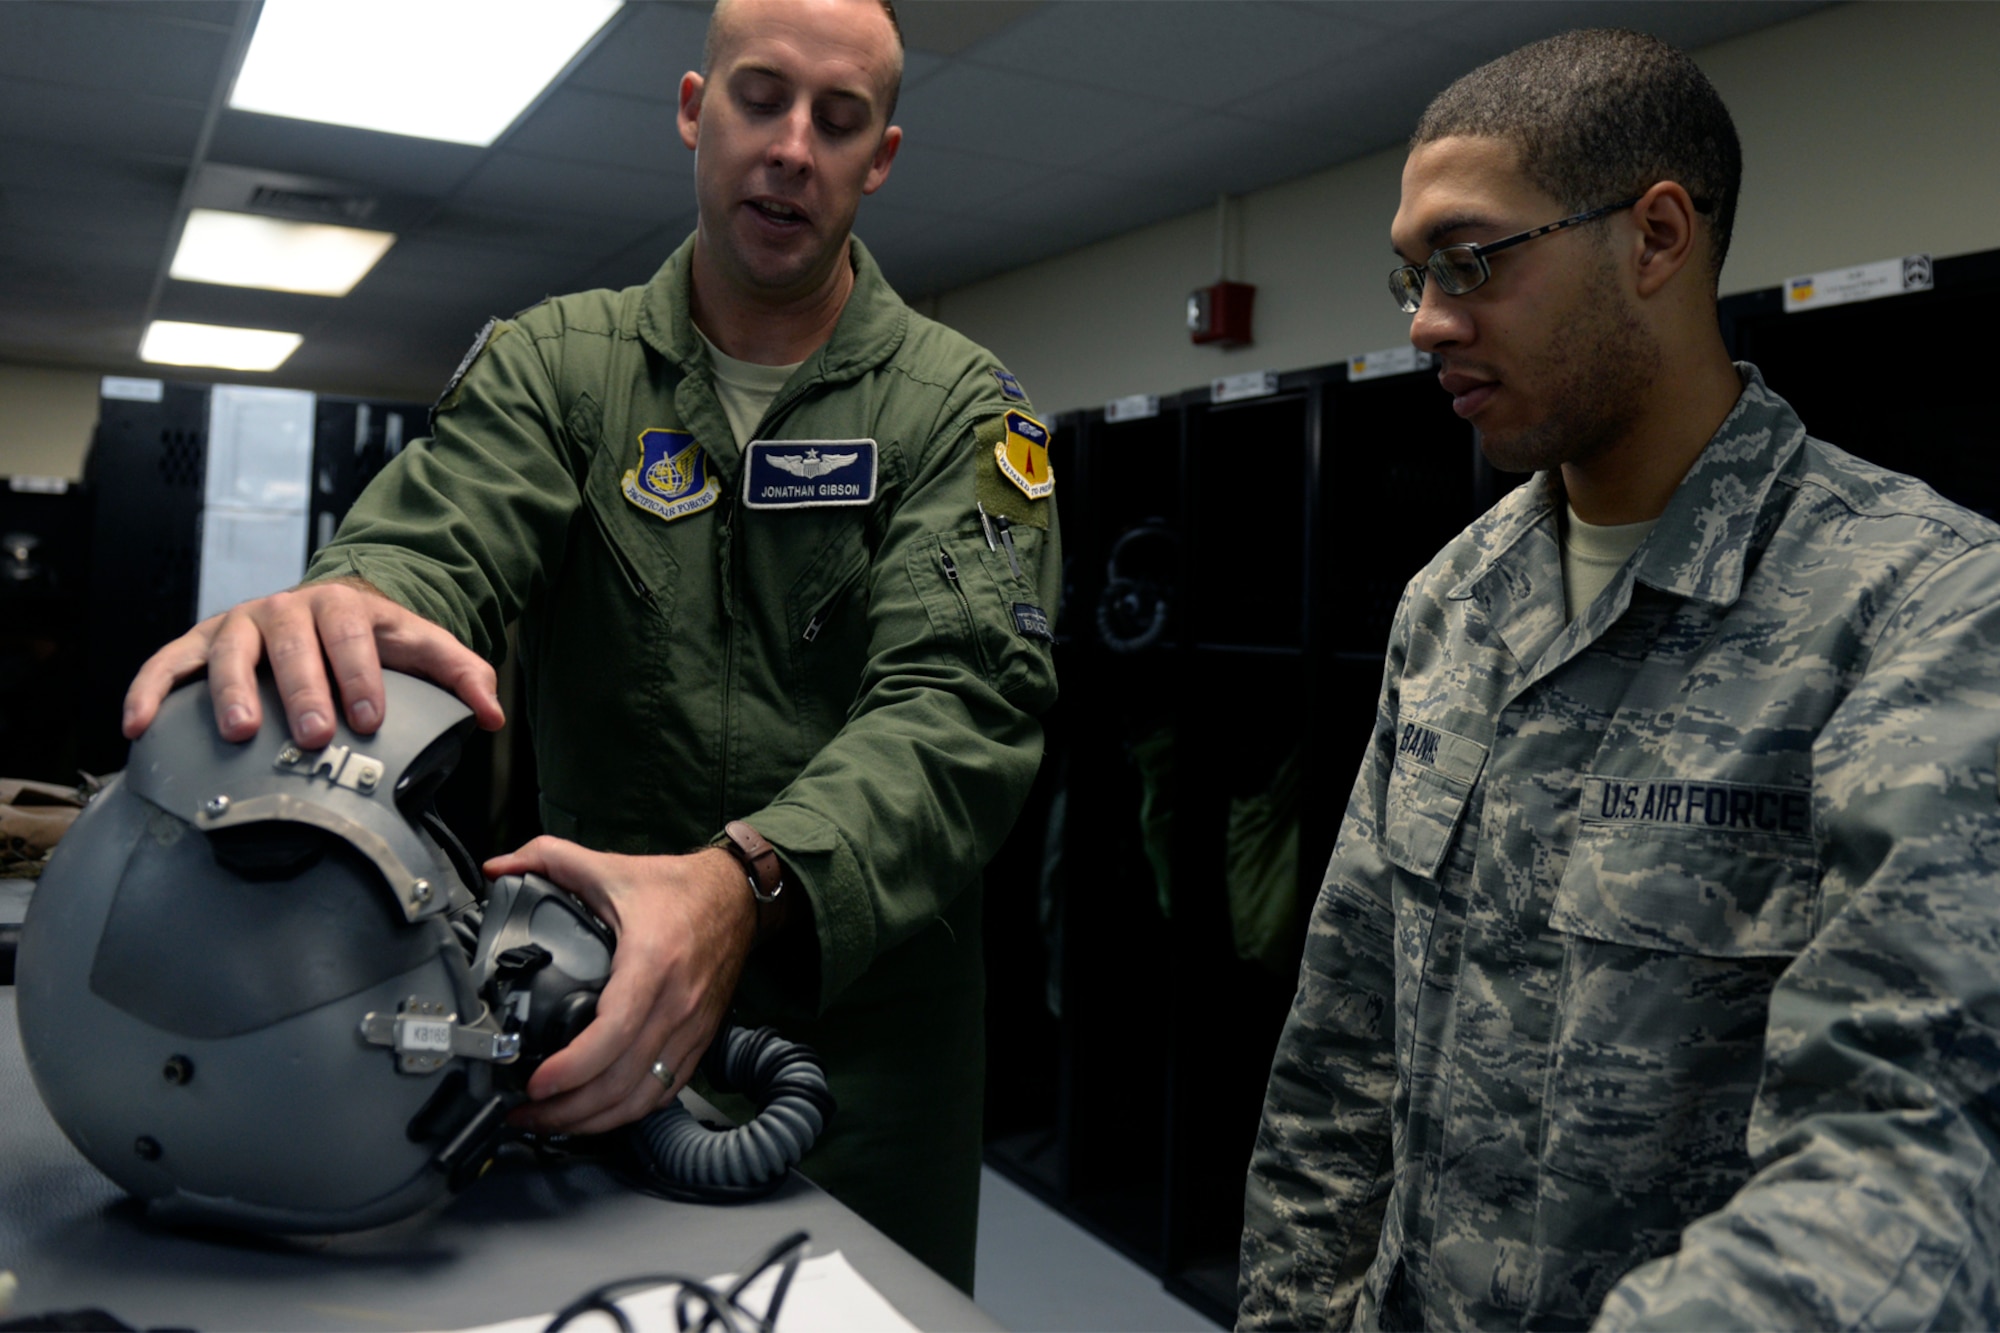 Capt. Jonathan Gibson, 20th Expeditionary Bomb Squadron B-52 Stratofortress pilot, left, informs Airman 1st Class Michael Banks, 20th EBS aircrew flight equipment specialist, about needed adjustments to his flight helmet Aug. 12, 2015, at Andersen Air Force Base, Guam. As an AEF specialist Banks repairs and maintains vital life support equipment for aviators.  (U.S. Air Force photo by Staff Sgt. Alexander W. Riedel/Released)